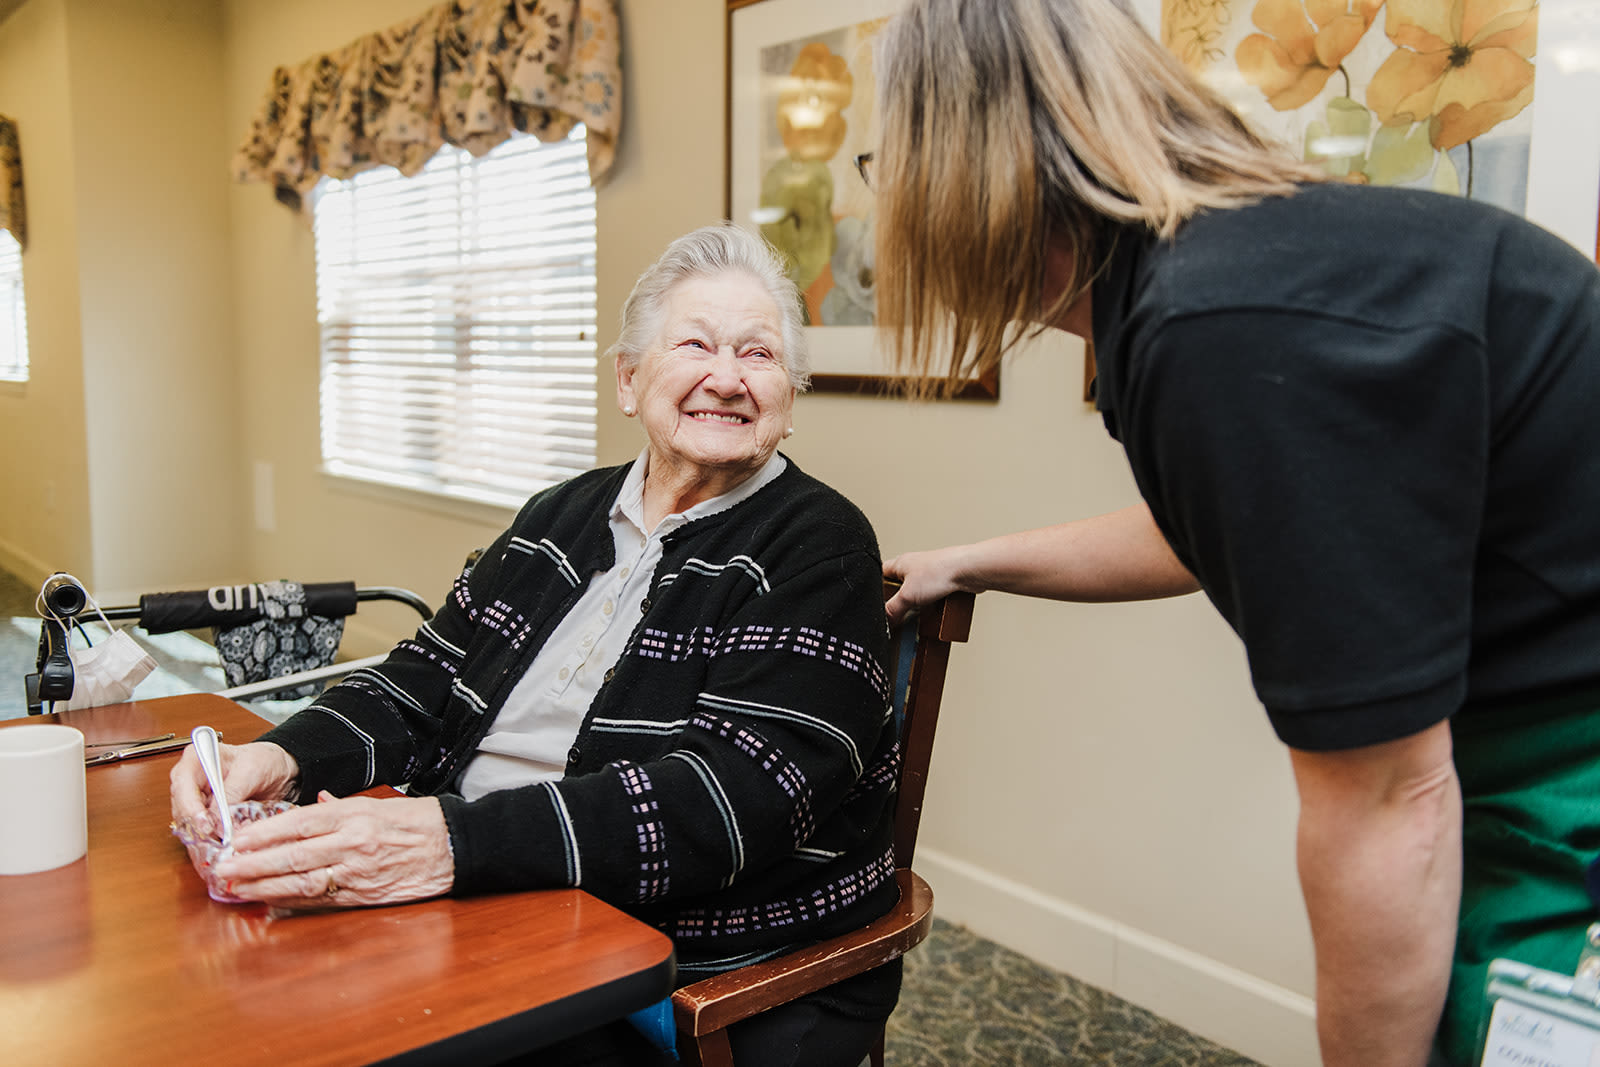 Caretaker talking to a resident at English Meadows Laurens Campus in Laurens, South Carolina